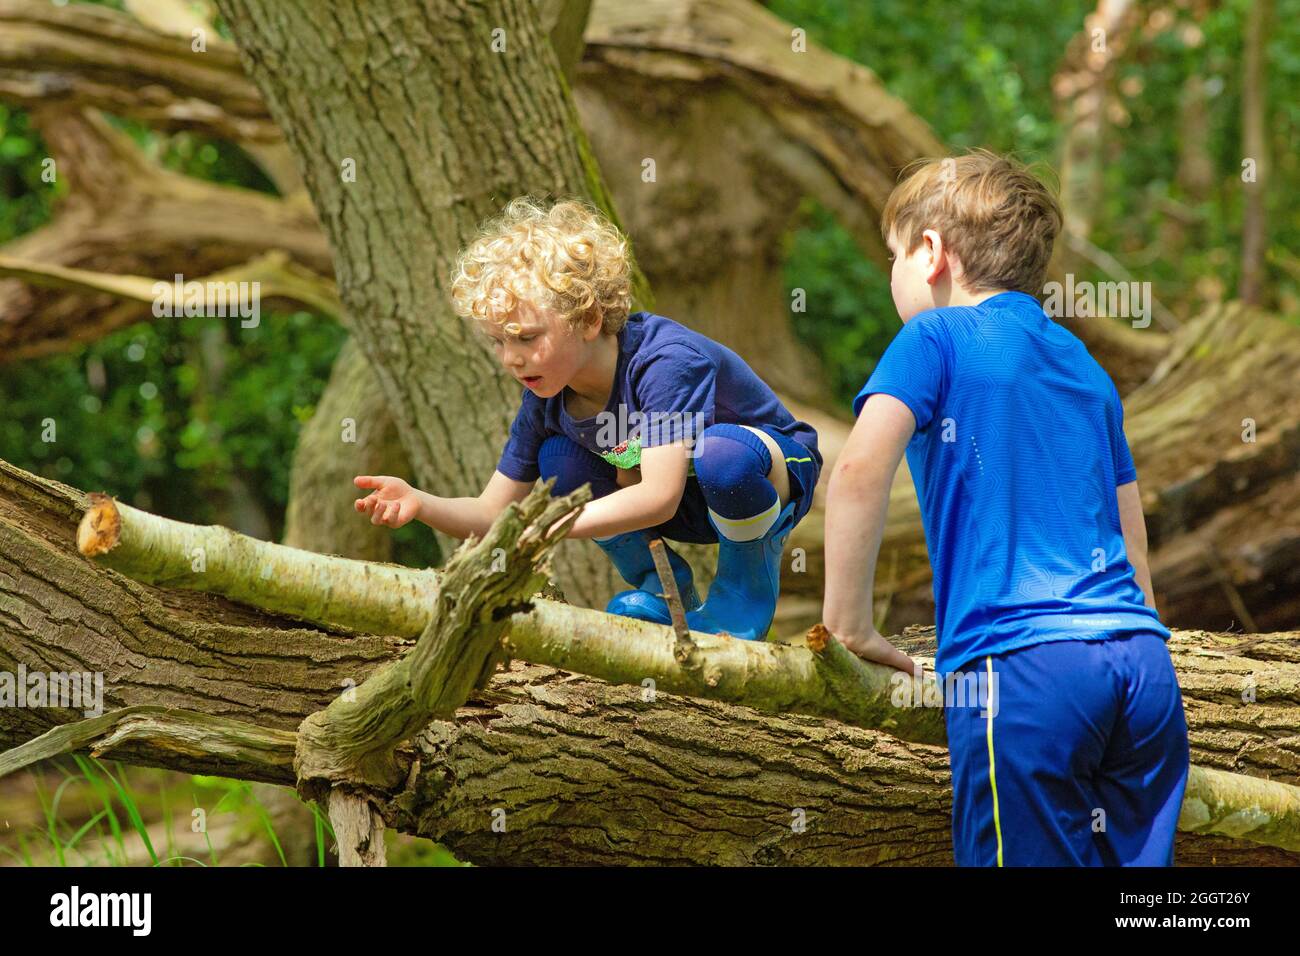 Two young boys, brothers, siblings, together, delight, surprise, explore, climbing, shared discovery of nature on a fallen dead tree trunk in woodland. Stock Photo